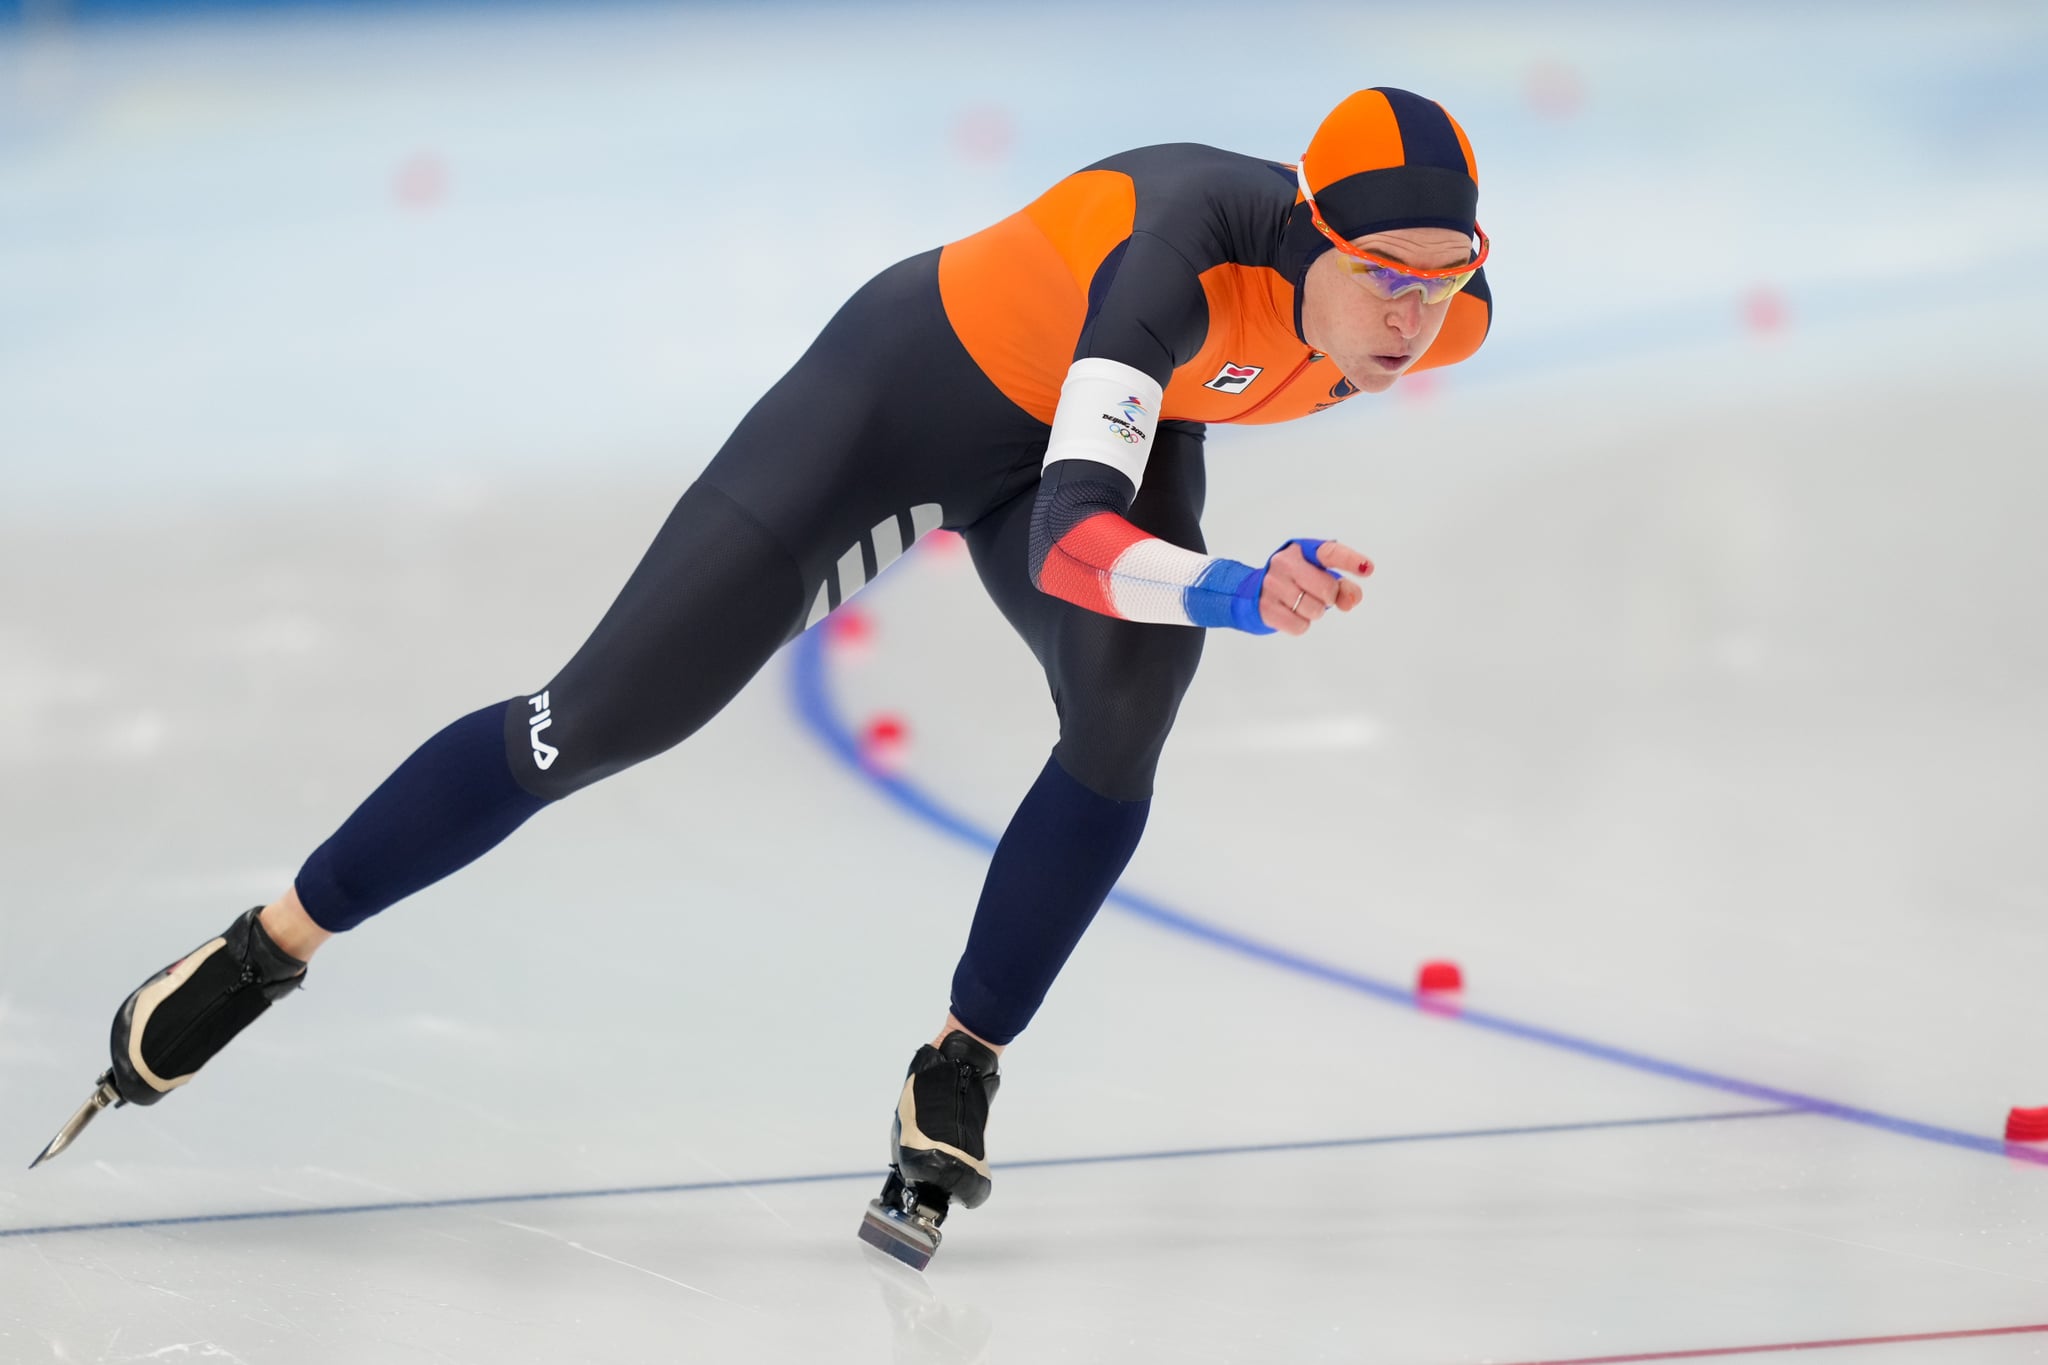 BEIJING, CHINA - FEBRUARY 7: Ireen Wust of the Netherlands during the Women's 1500m on day 2 of the Beijing 2022 Olympic Games at the National Speedskating Oval on February 7, 2022 in Beijing, China (Photo by Douwe Bijlsma/BSR Agency/Getty Images)